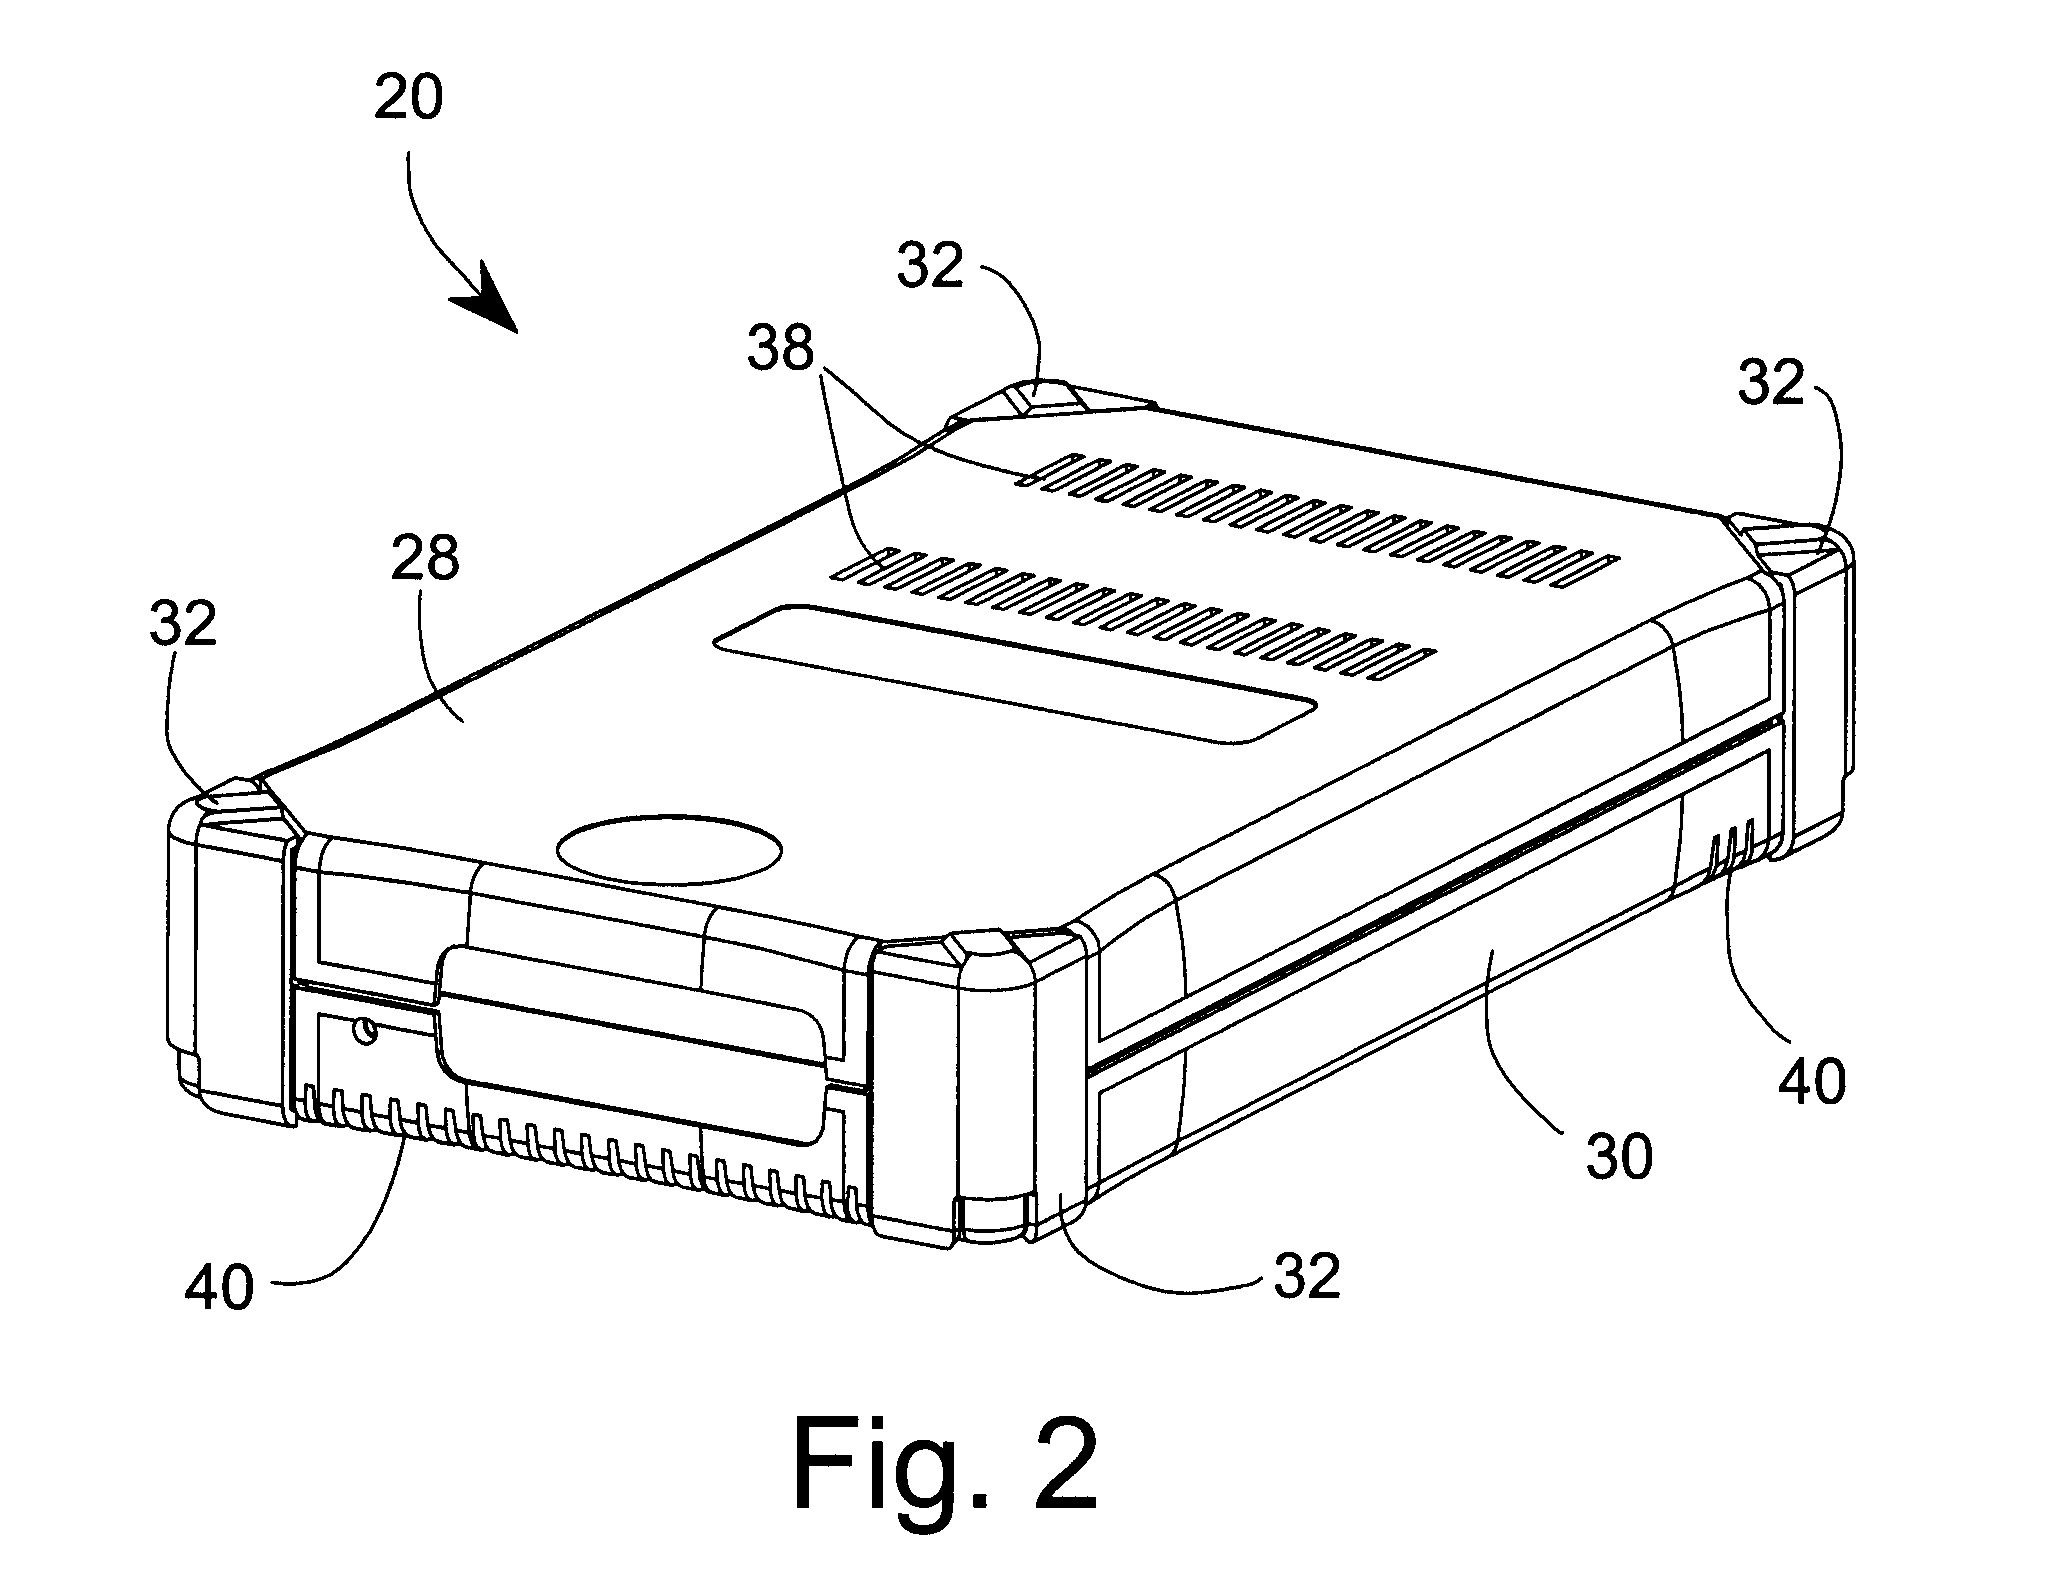 Energy dissipative device and method